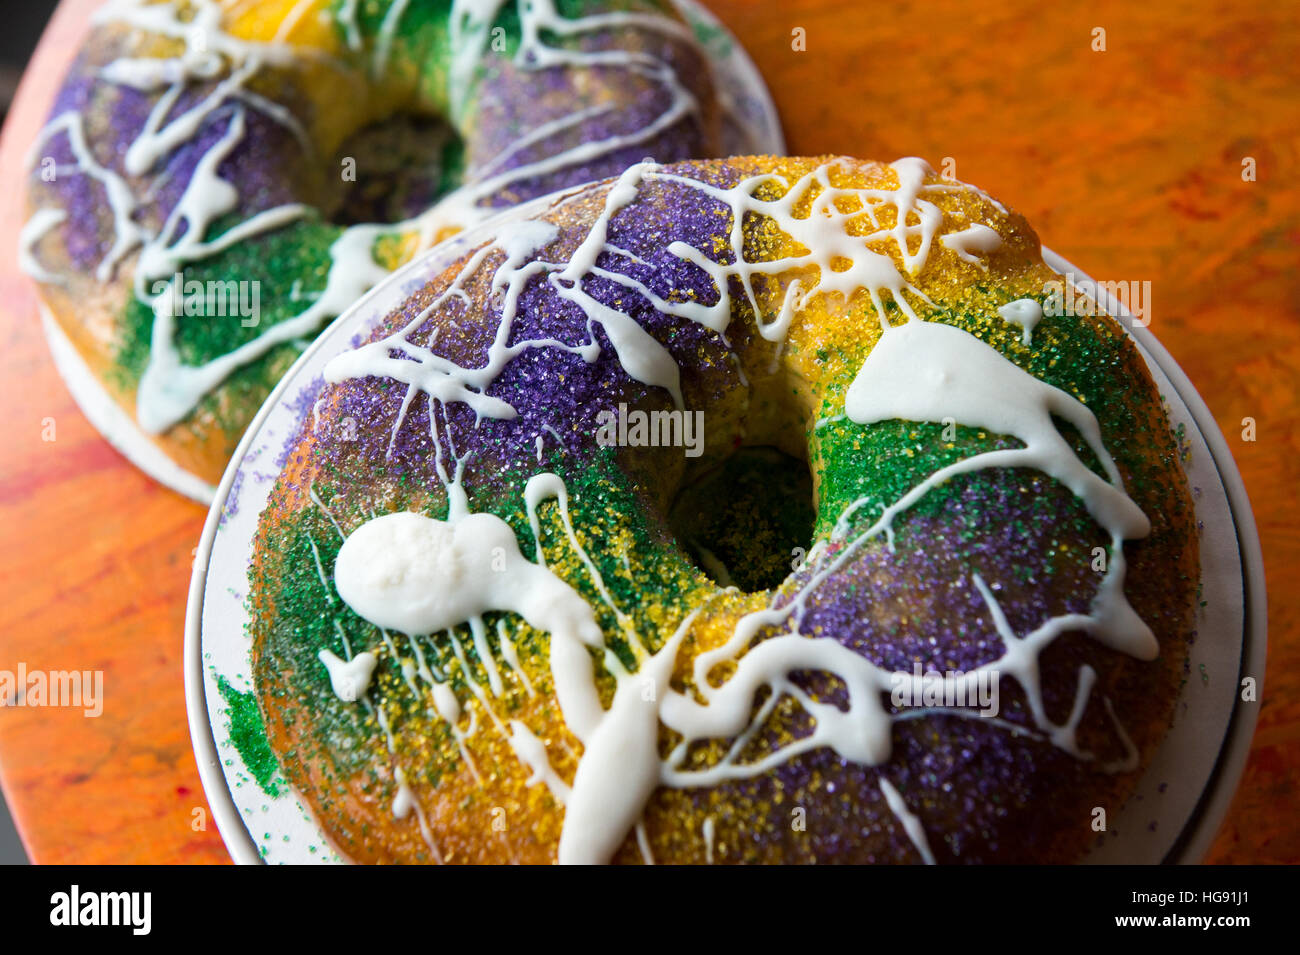 New Orleans king cakes up close on a table. Stock Photo